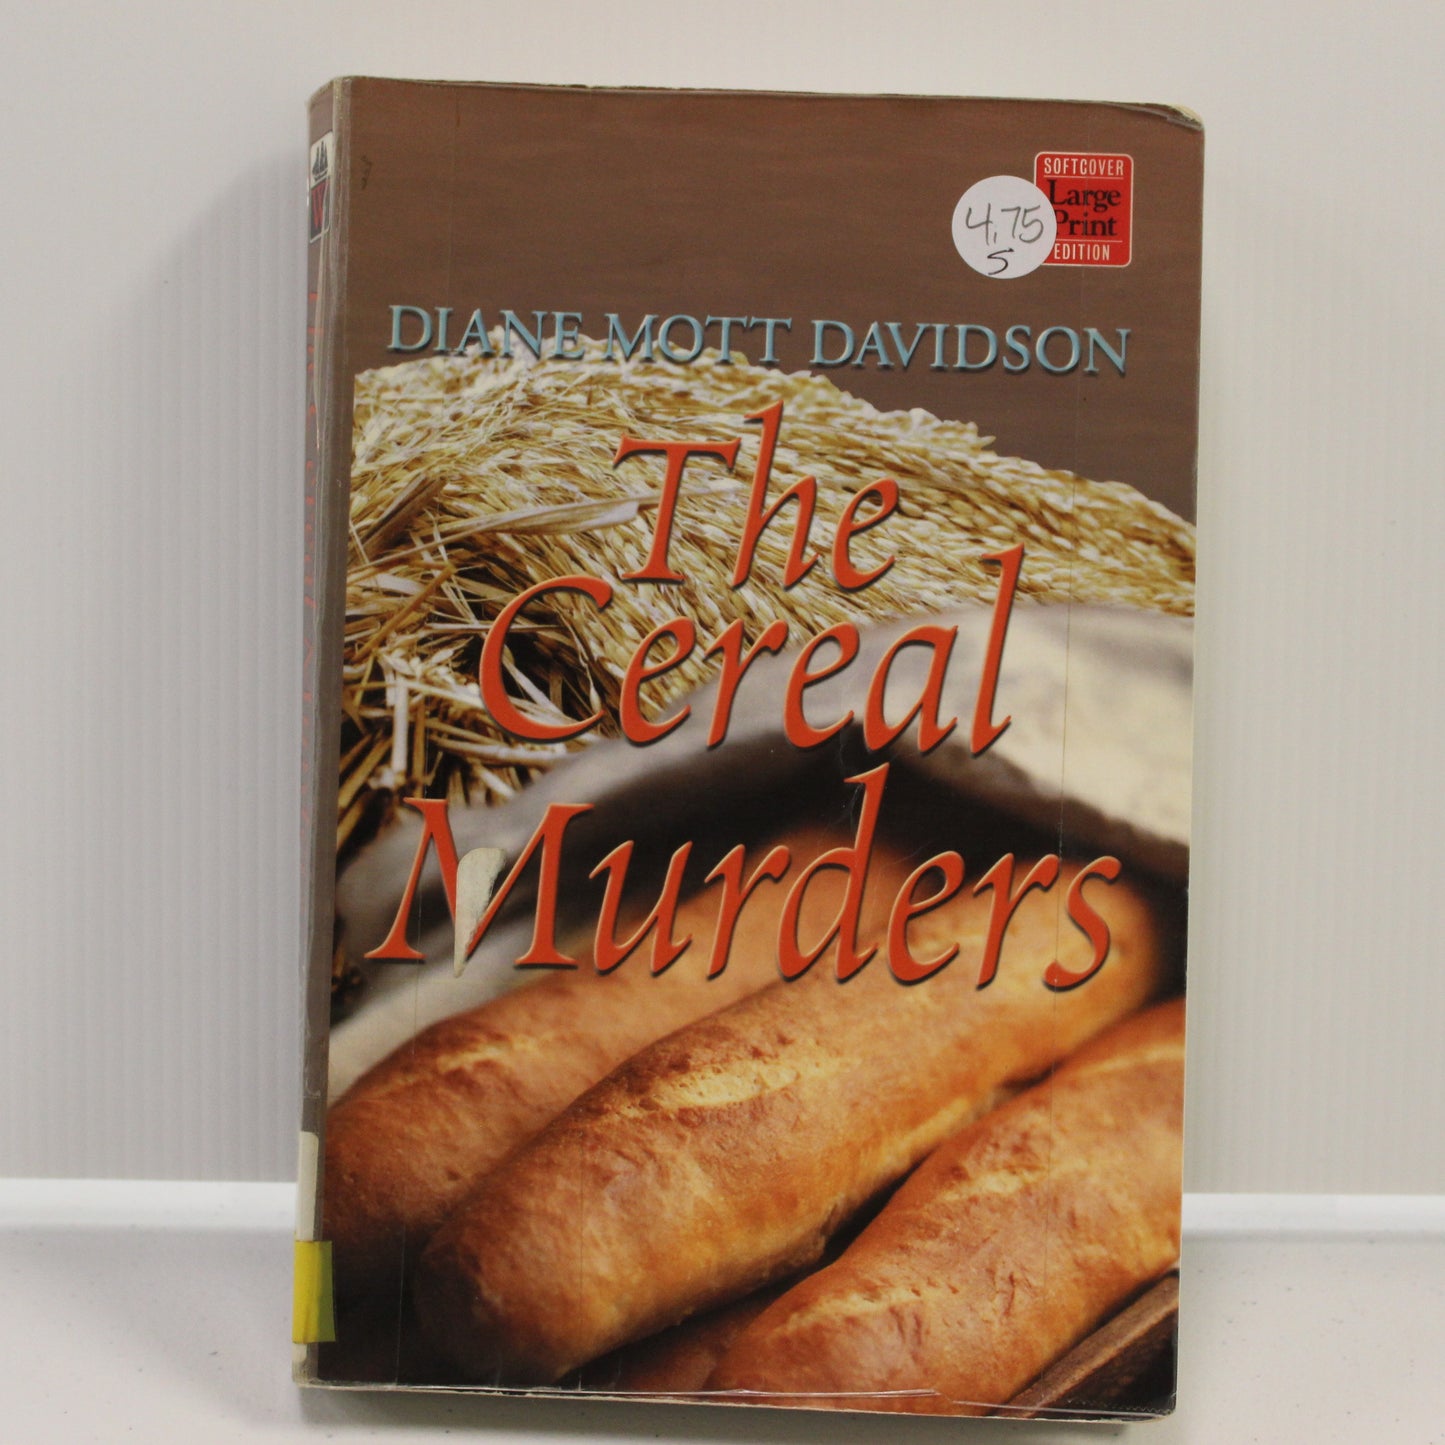 THE CEREAL MURDERS